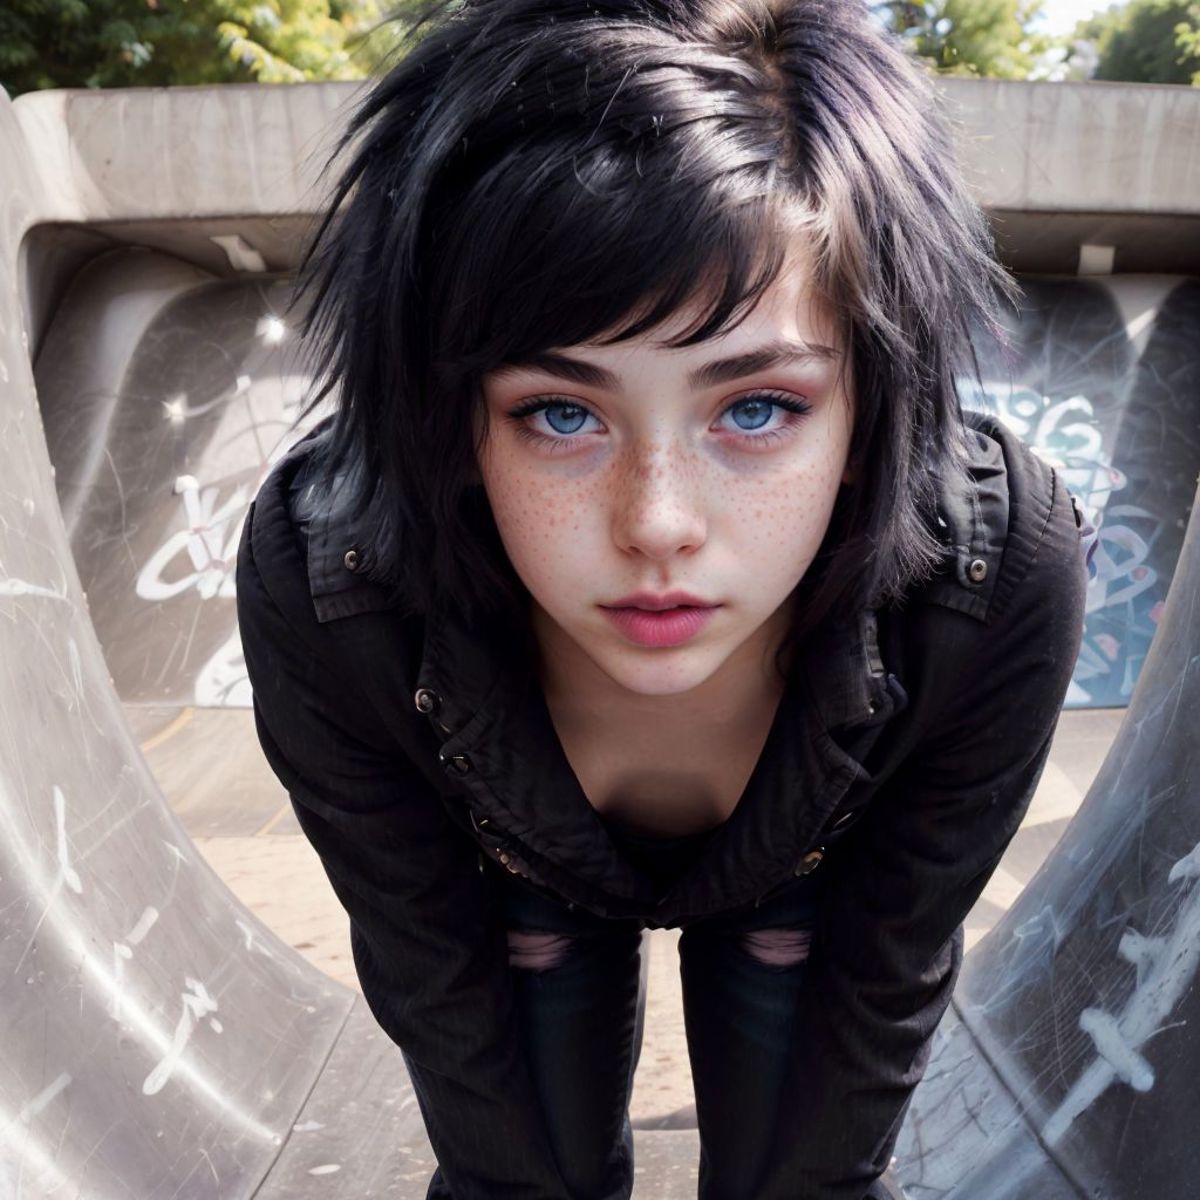 Young girl with blue eyes wearing black clothing and leaning over a cement skate ramp.